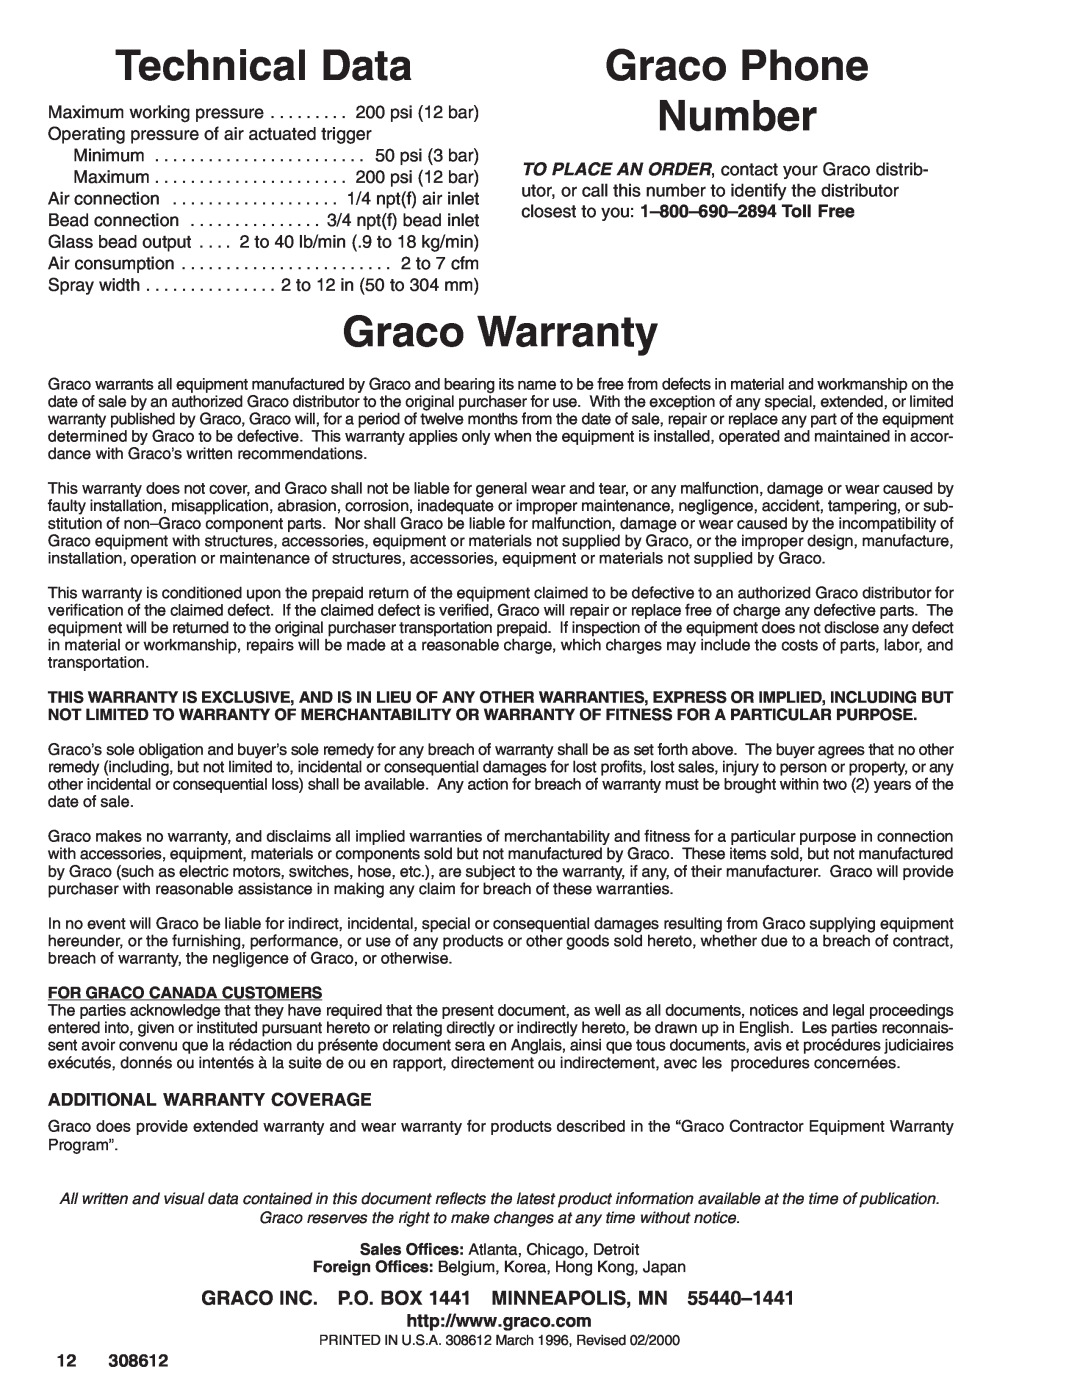 Graco Inc 308612, 238338 manual Technical Data, Graco Phone Number, Graco Warranty, Additional Warranty Coverage 